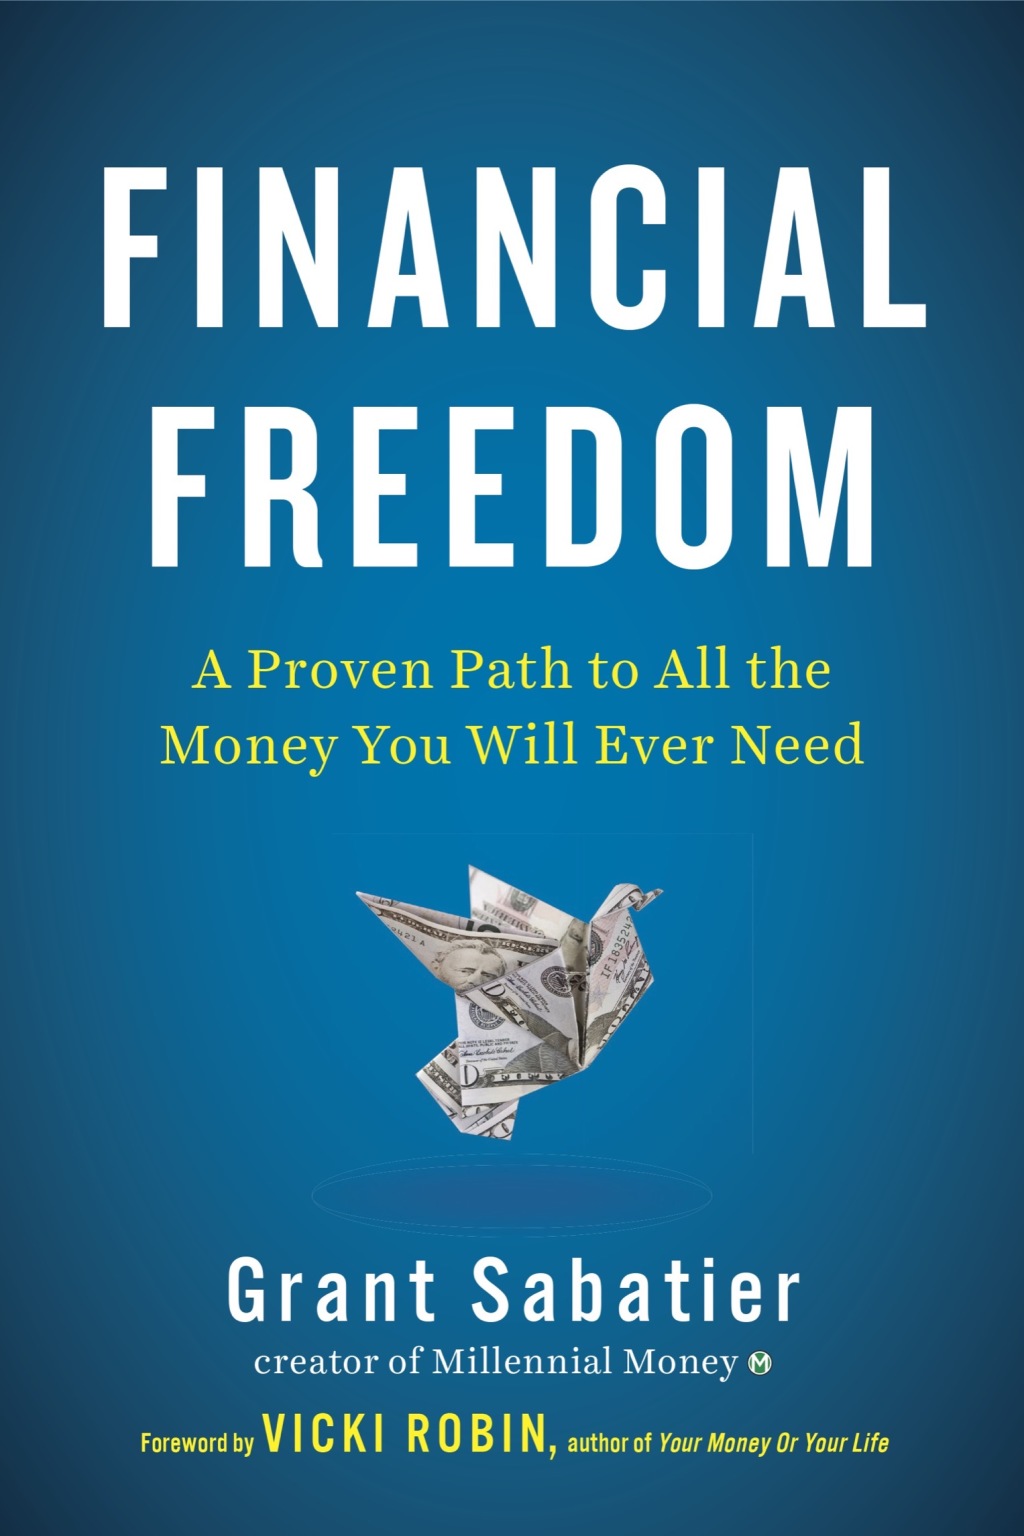 Financial Freedom: A Proven Path to All the Money You Will Ever Need (Hardcover) by Grant Sabatier, Vicki Robin - image 4 of 5